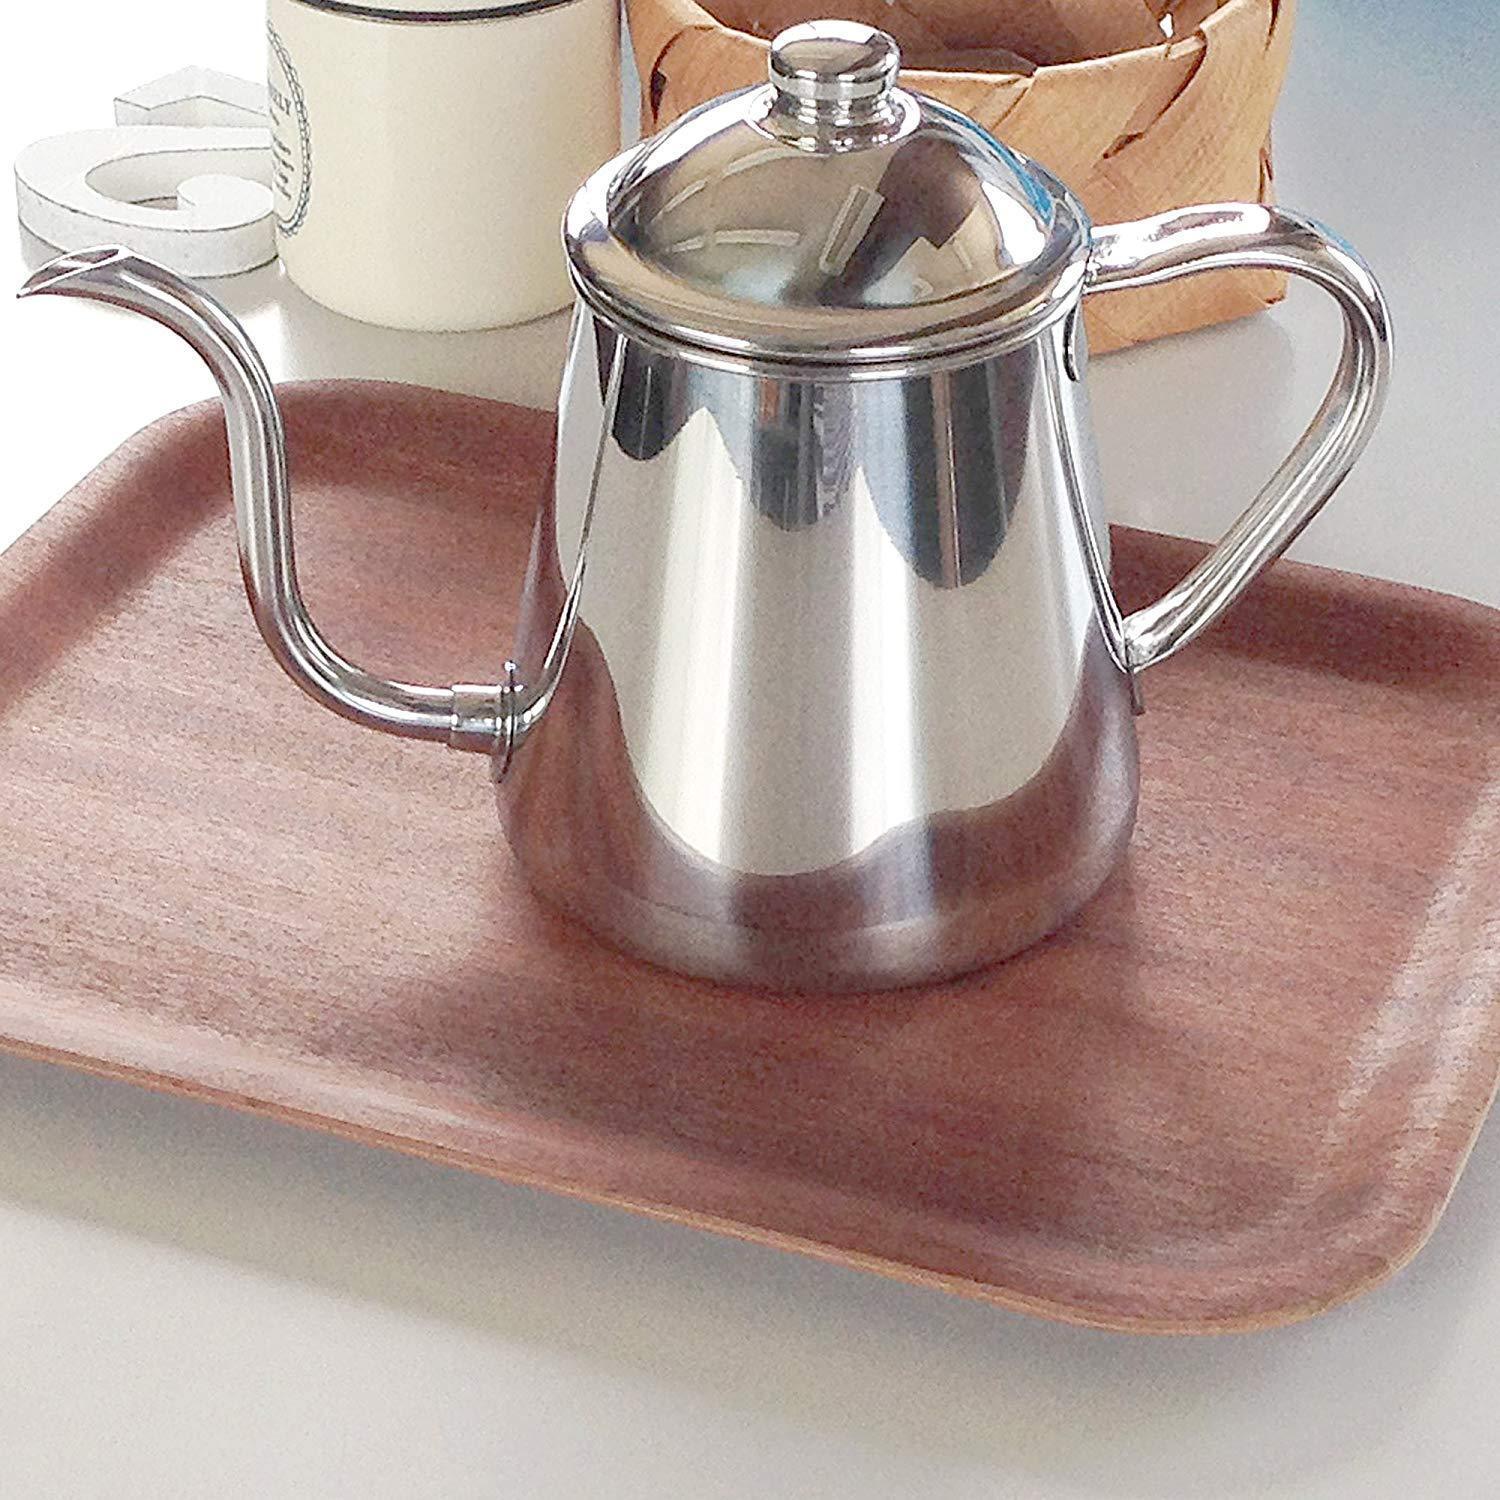 https://cdn.shopify.com/s/files/1/0695/5712/5440/products/Takahiro-Pour-Over-Coffee-Drip-Kettle-0_9L-Japanese-Taste-2.jpg?v=1694053950